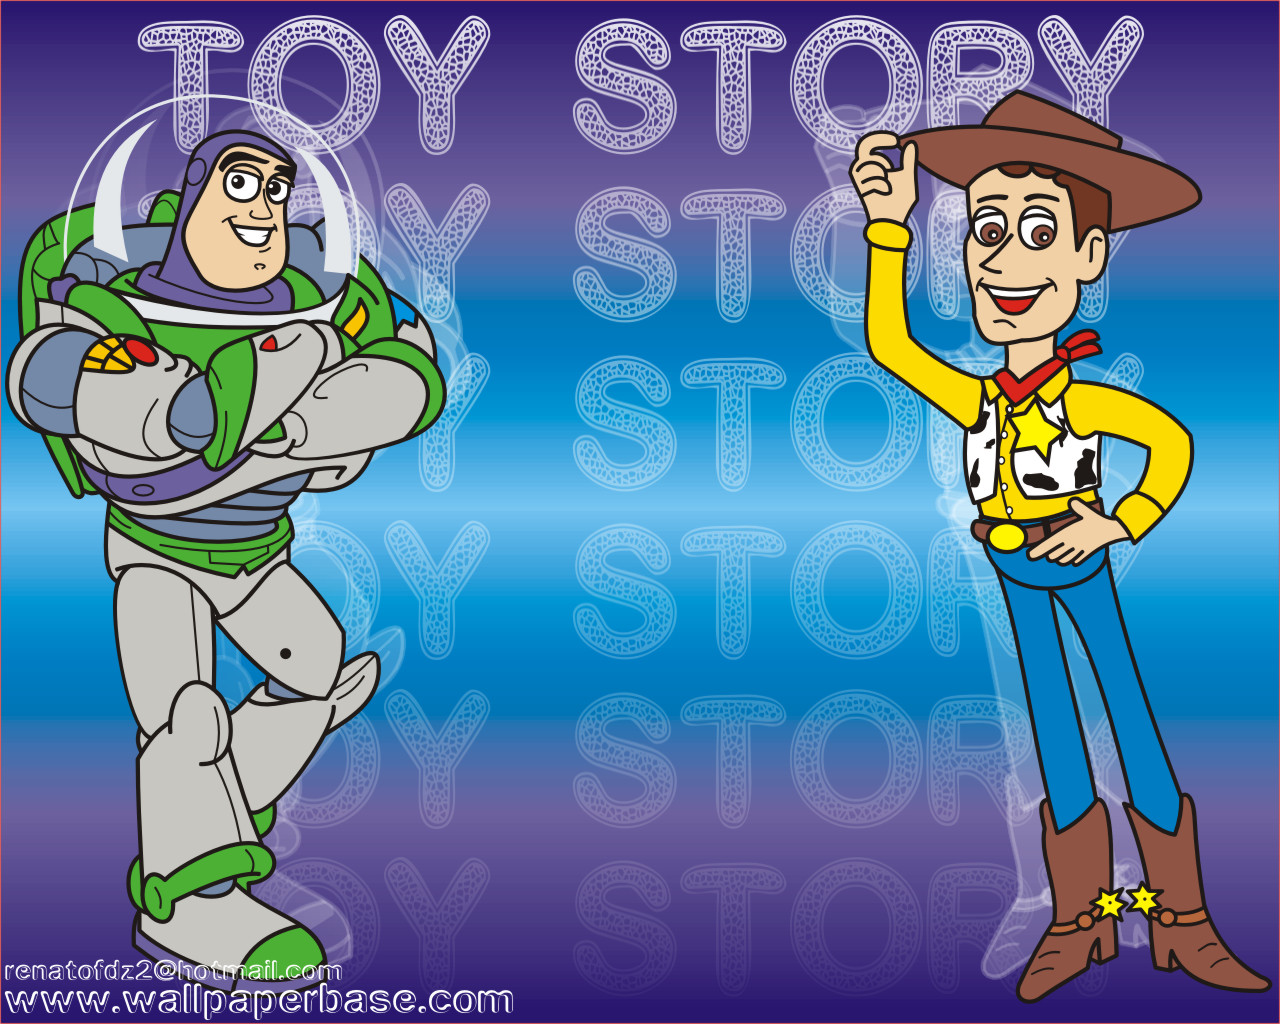 You are viewing the Toy Story wallpaper named Toy story 1.